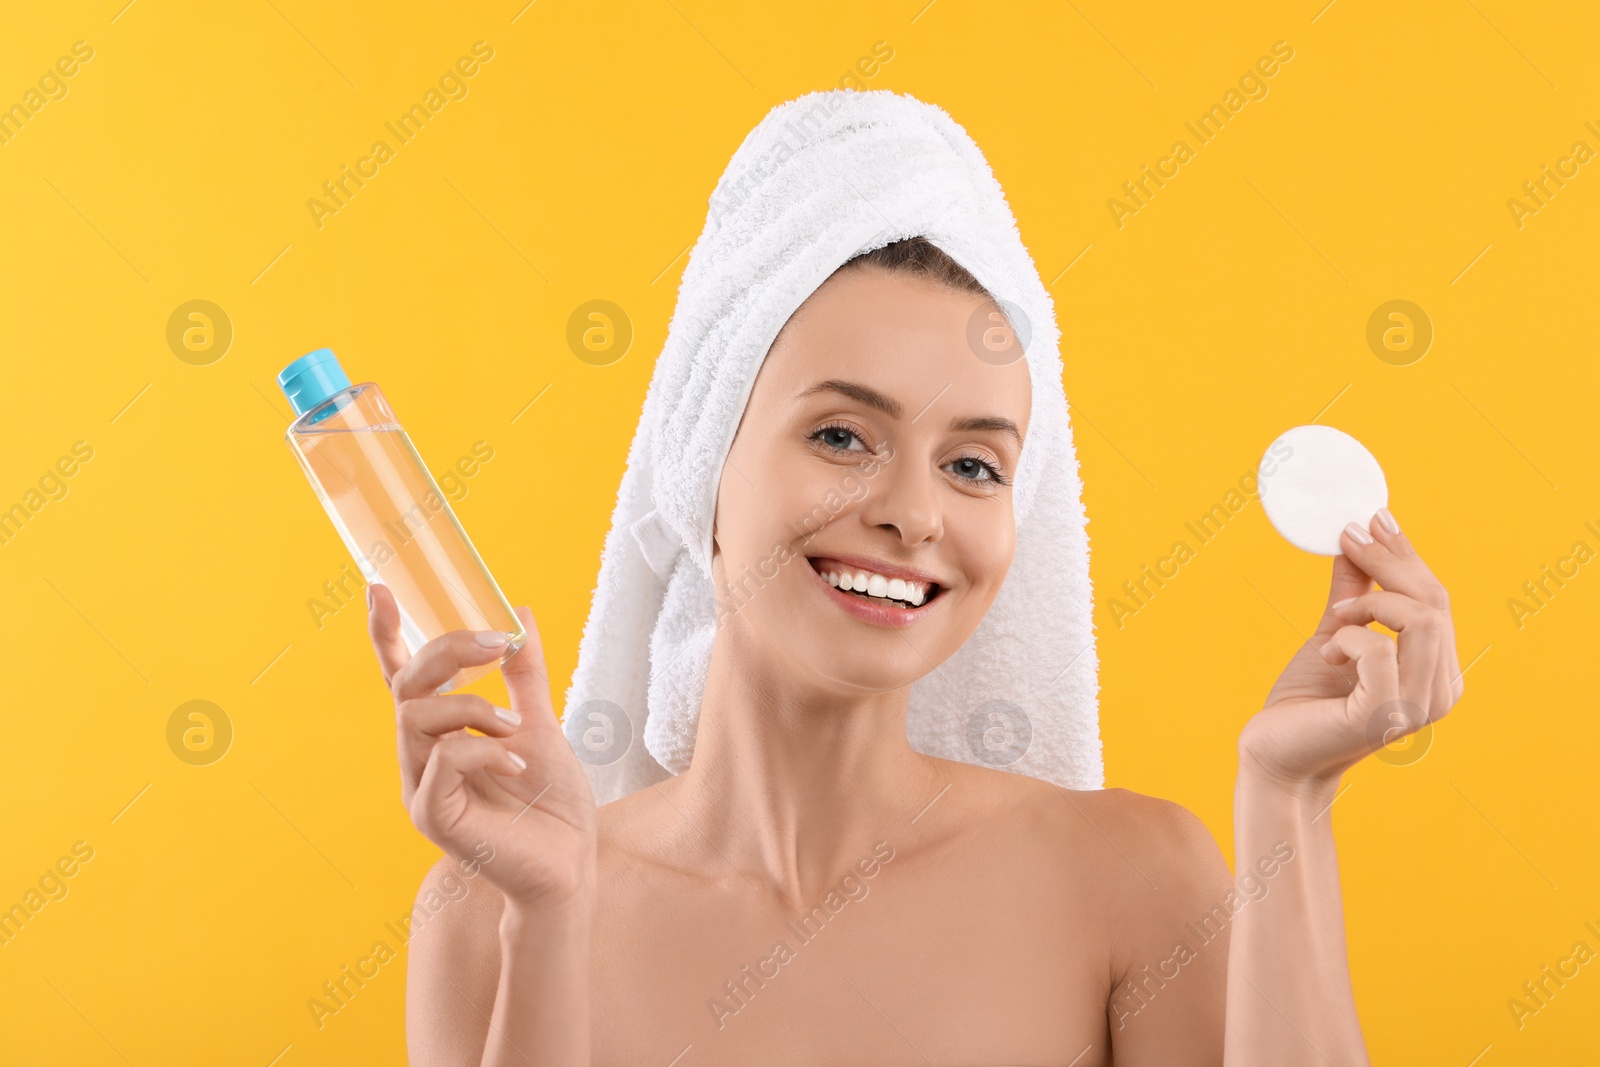 Photo of Removing makeup. Smiling woman with cotton pad and bottle on yellow background